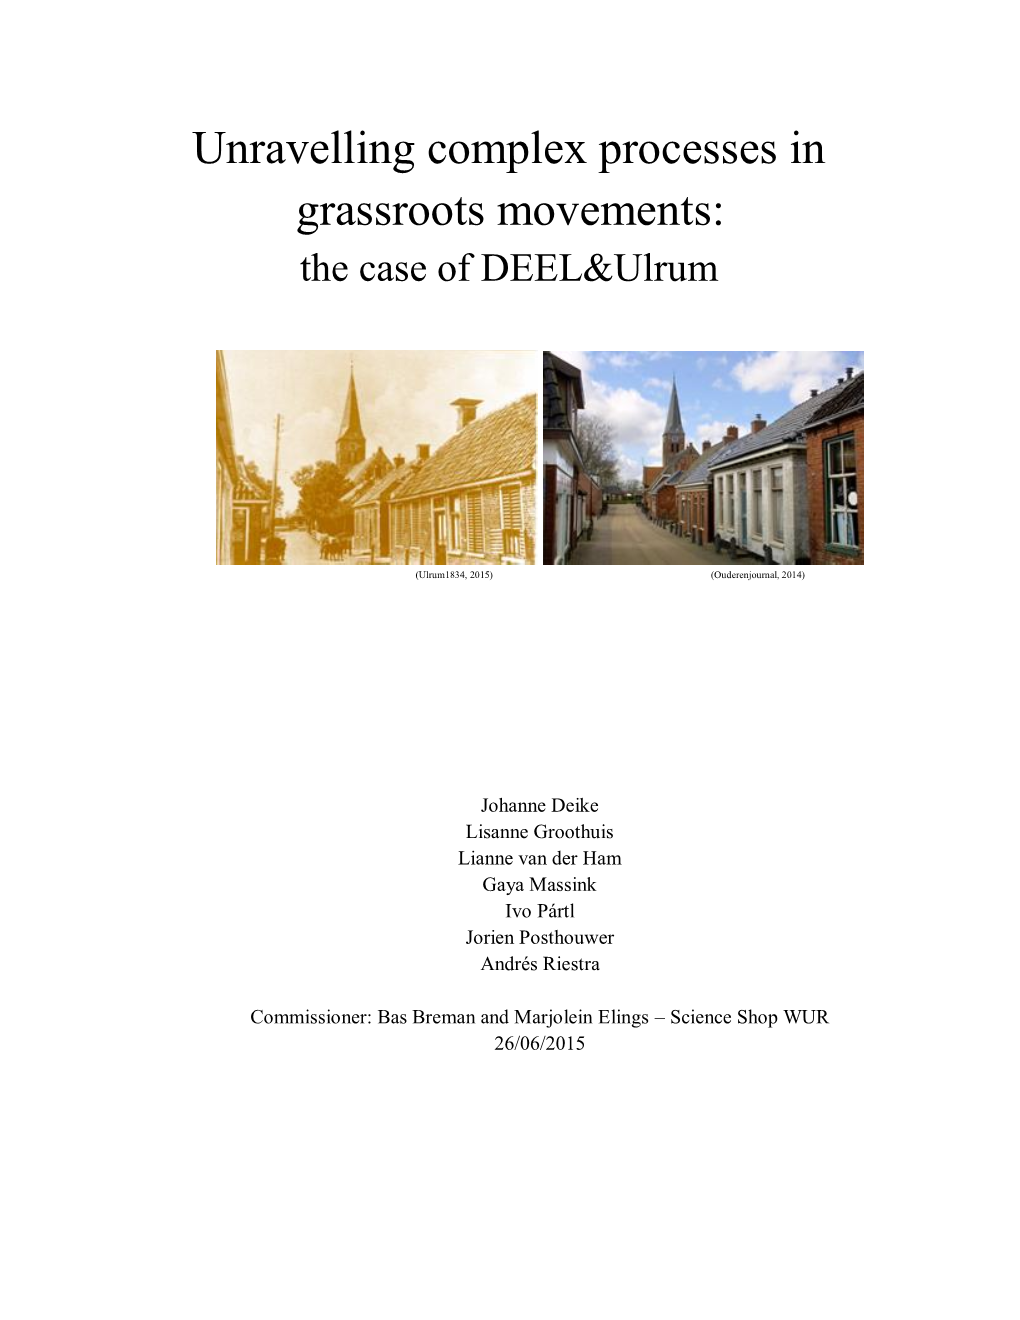 Unravelling Complex Processes in Grassroots Movements